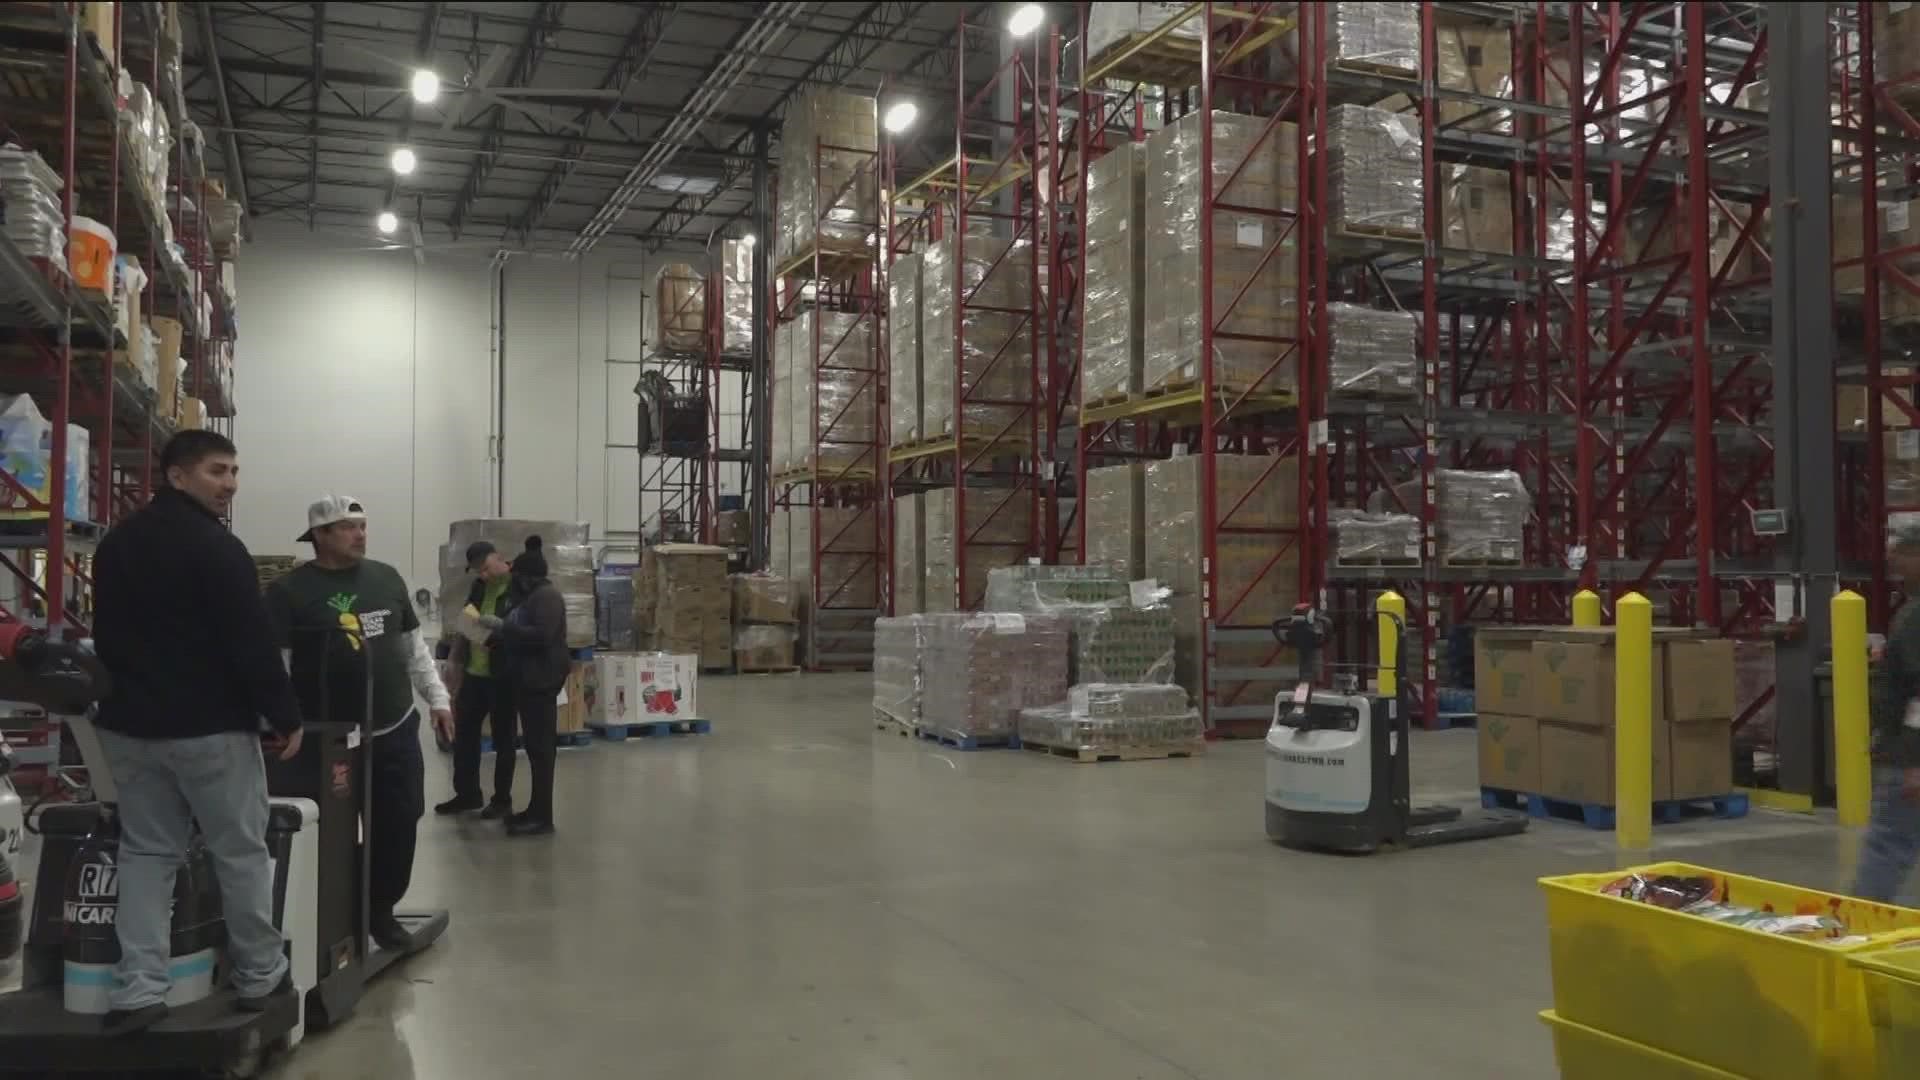 The CEO of the Central Texas Food Banks says inflation has caused the cost of living to increase, leading to more people struggling to make ends meet.